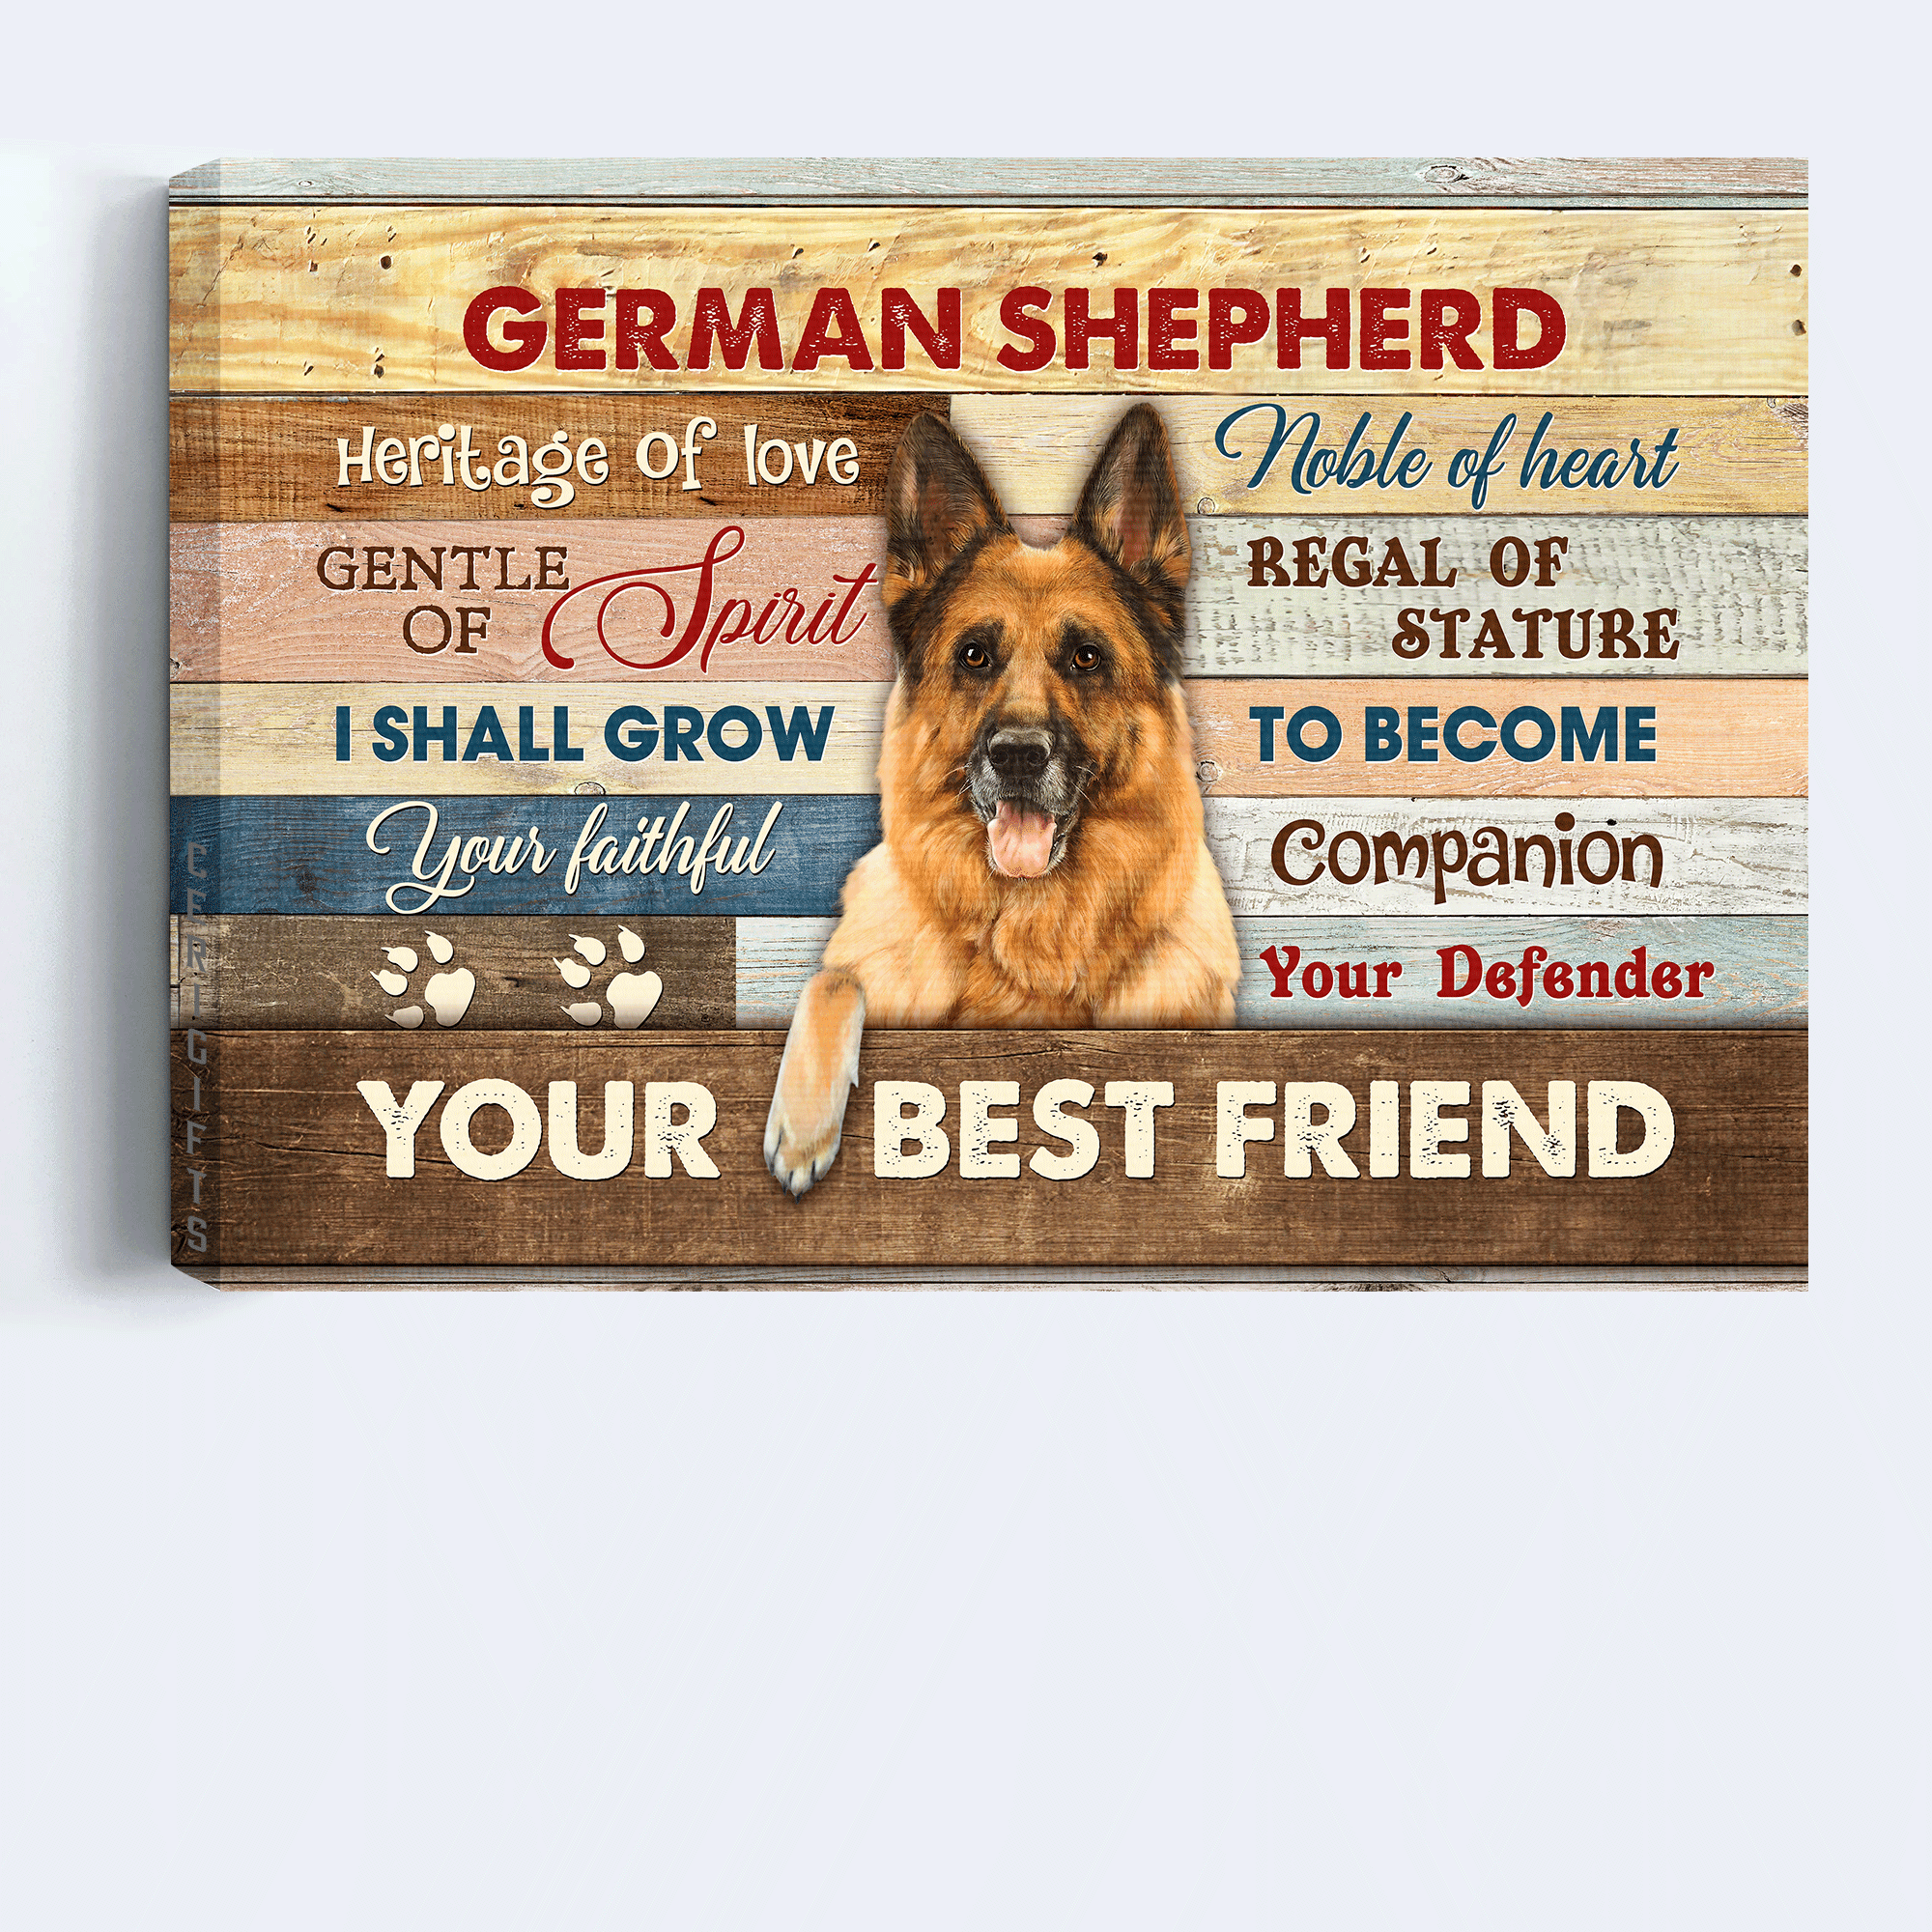 German Shepherd Premium Wrapped Landscape Canvas - Colorful Wooden Background, I Shall Grow Your Faithful - Gift for German Shepherd Lovers - Amzanimalsgift